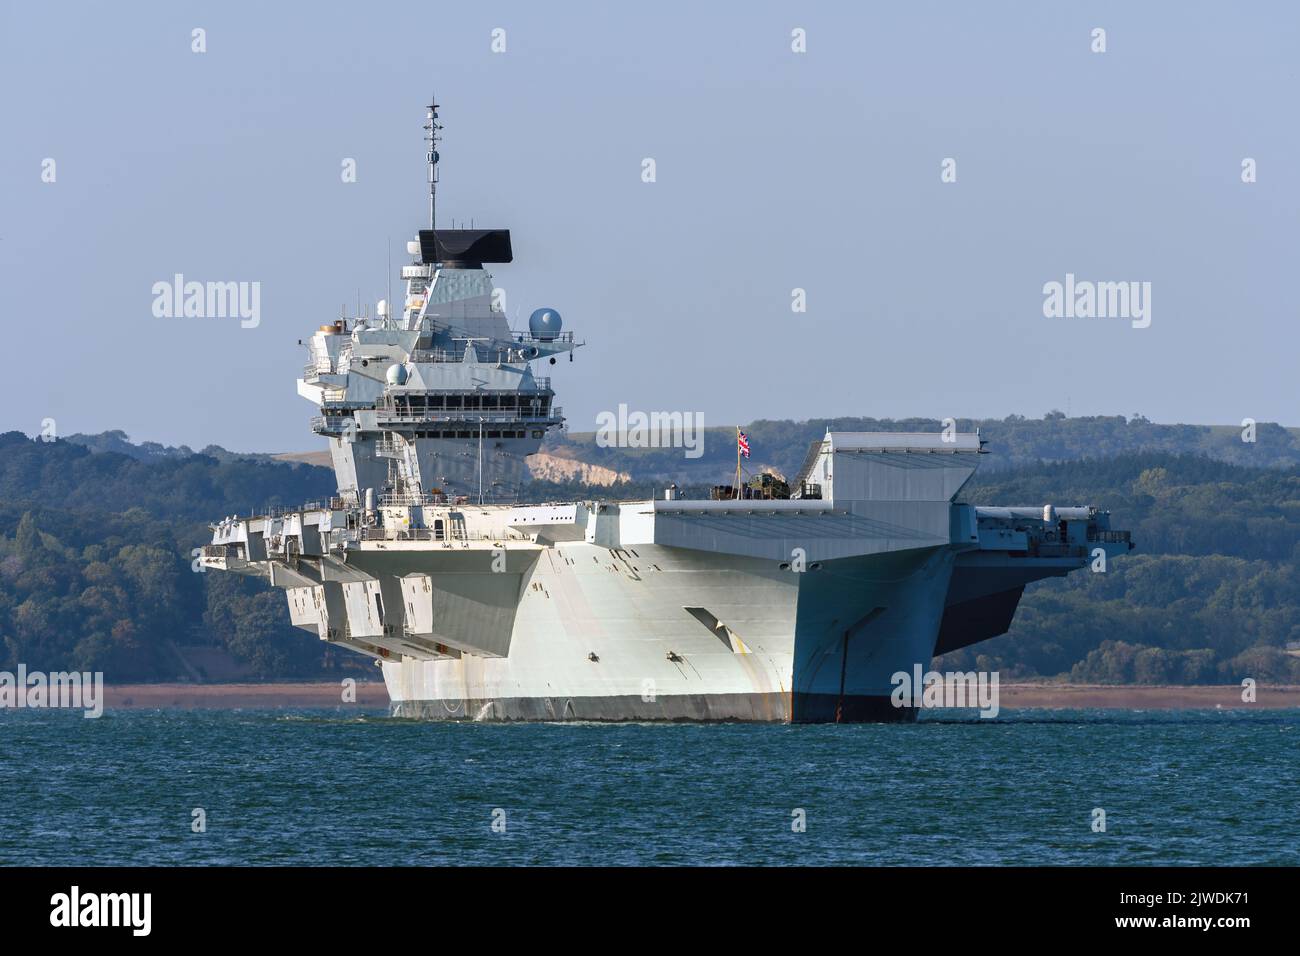 The Royal Navy Queen Elizabeth class aircraft carrier HMS Prince of Wales (R09) at anchor in the Solent. Stock Photo